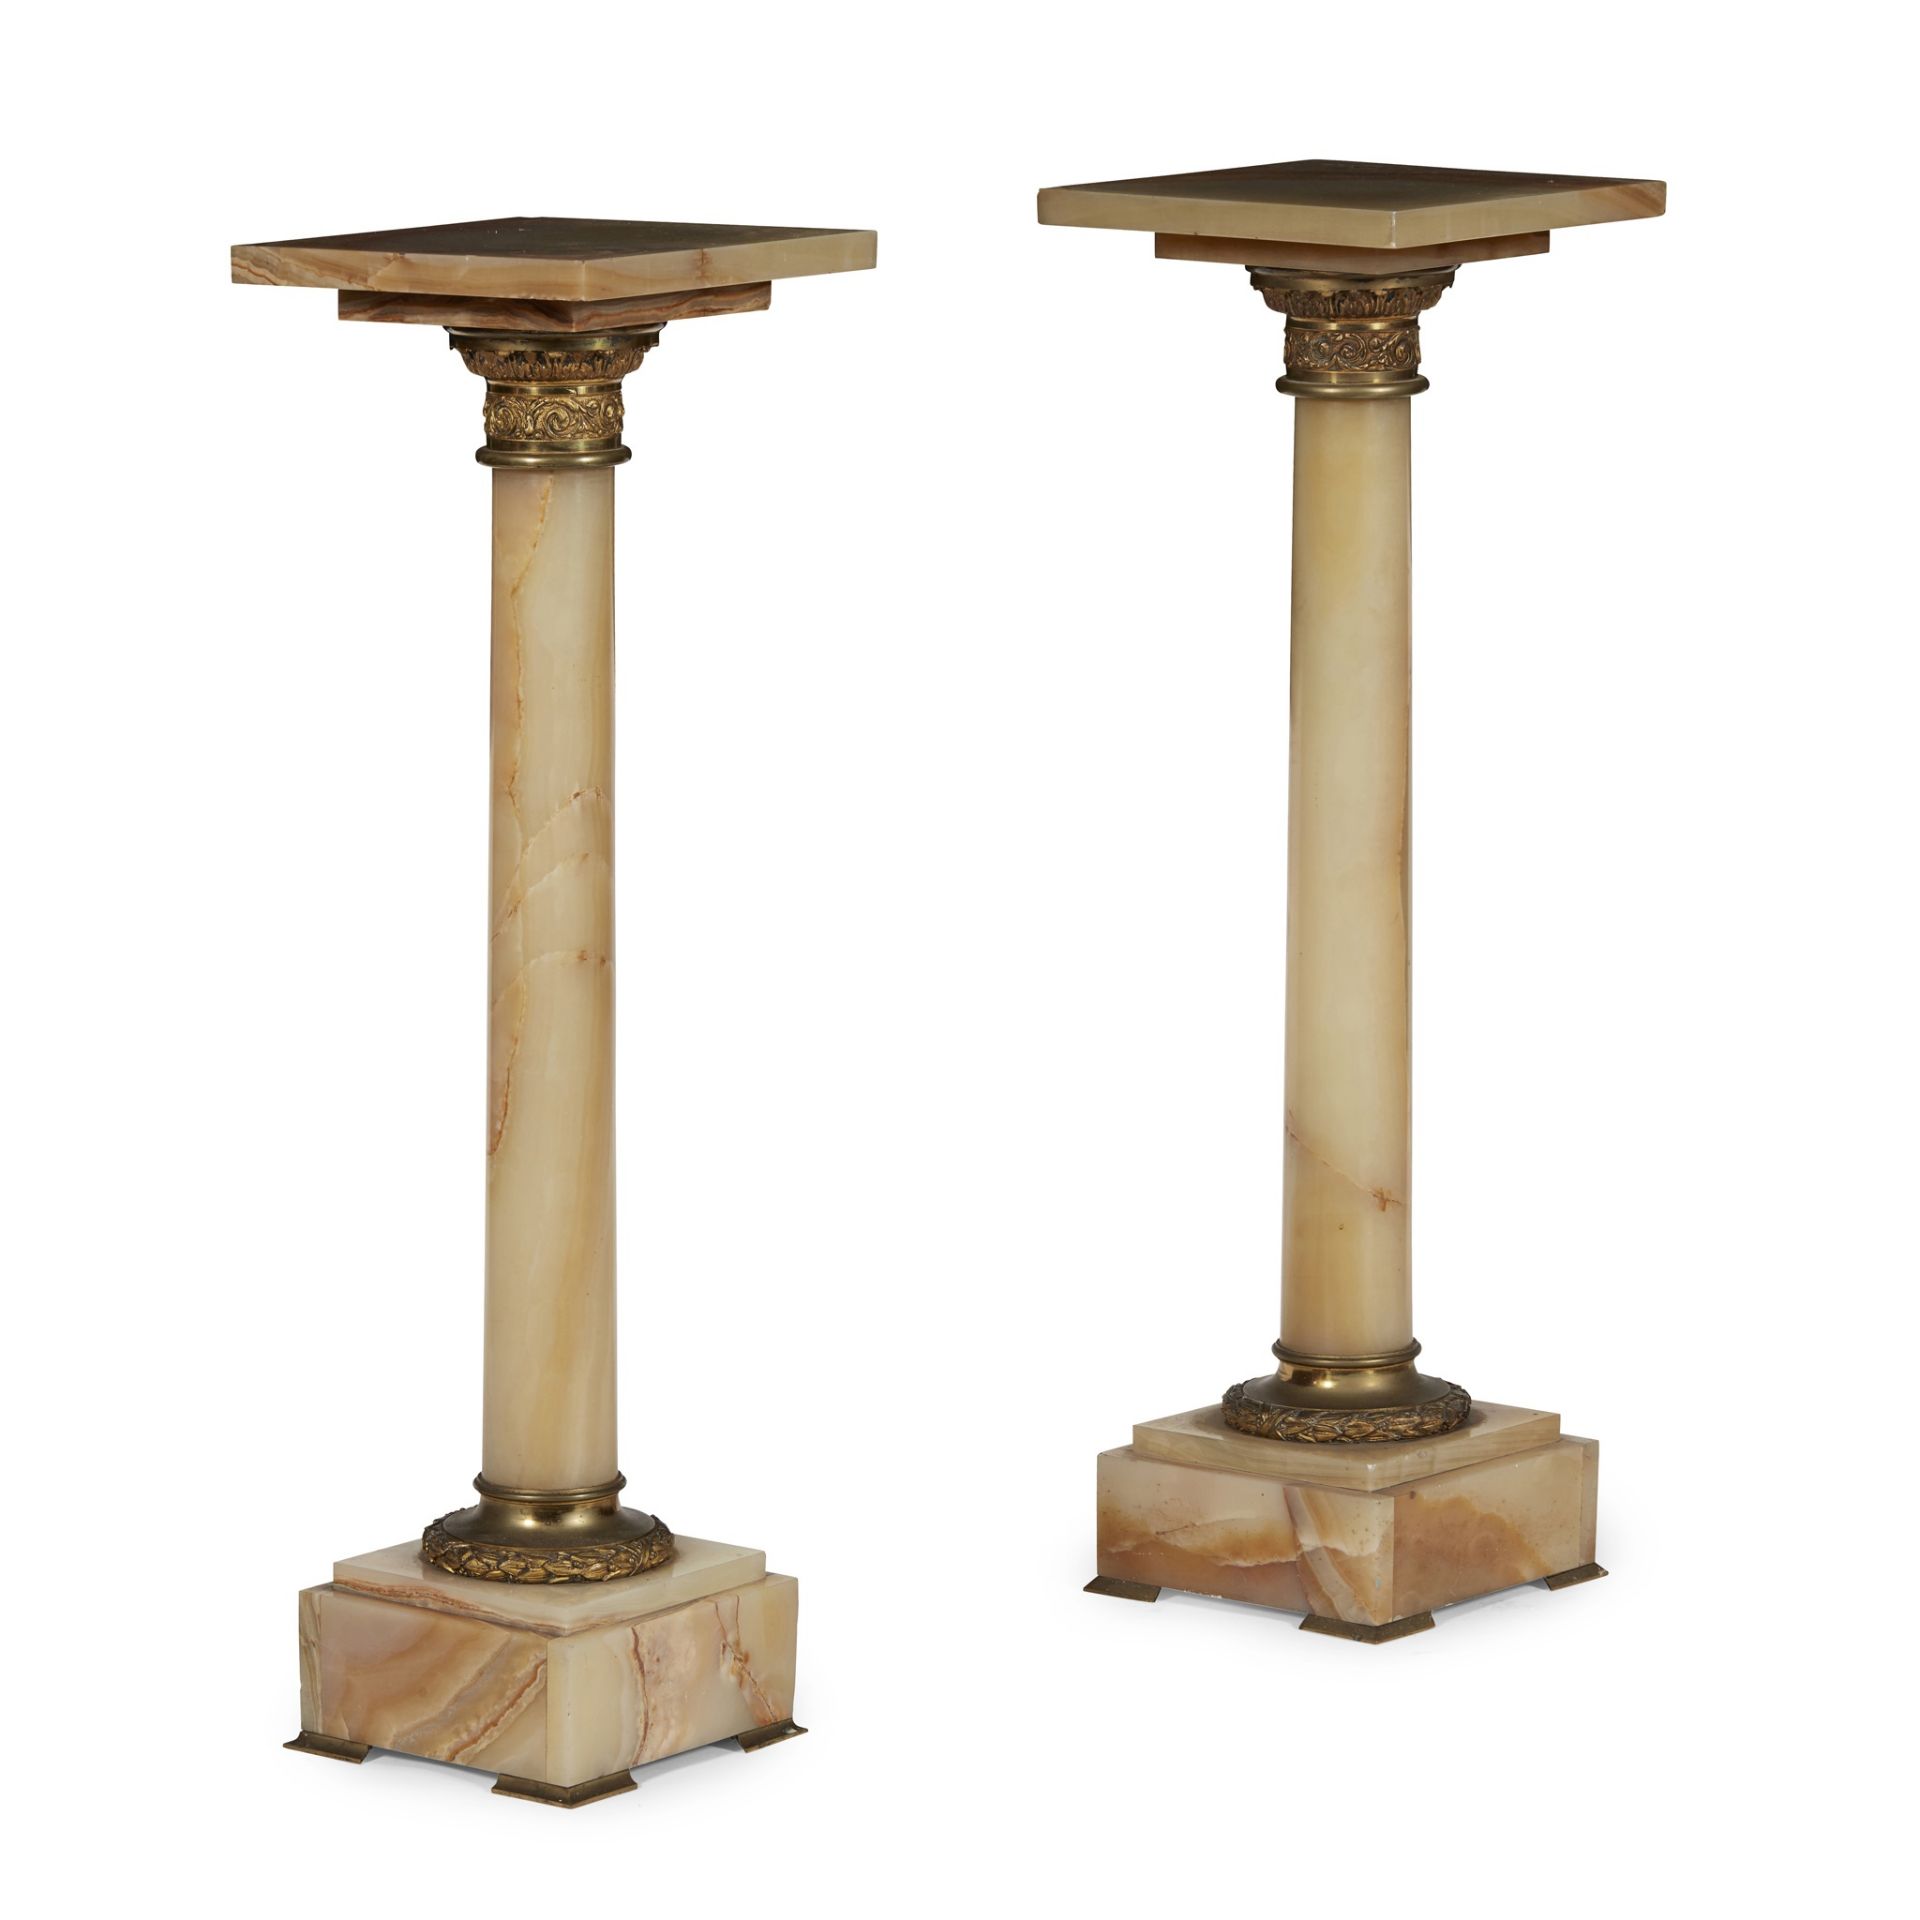 PAIR OF ONYX AND GILT BRASS PEDESTALS EARLY 20TH CENTURY